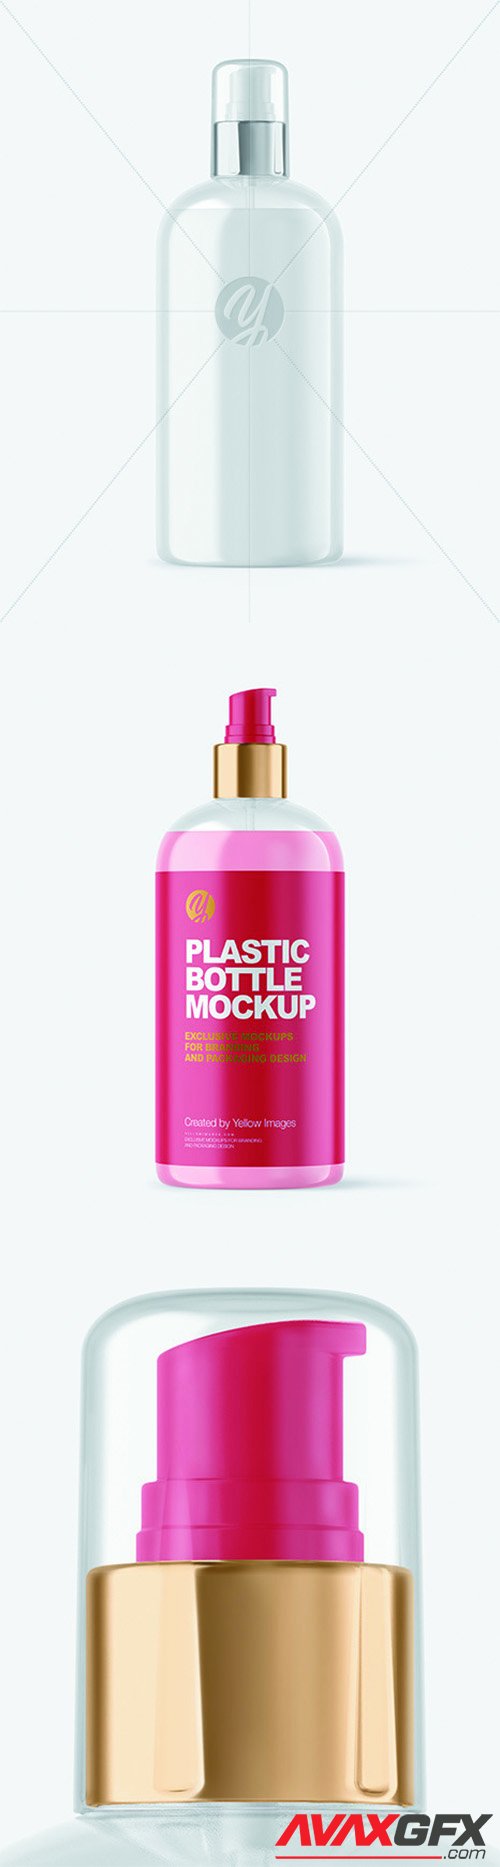 Clear Liquid Soap Bottle with Pump Mockup 66360